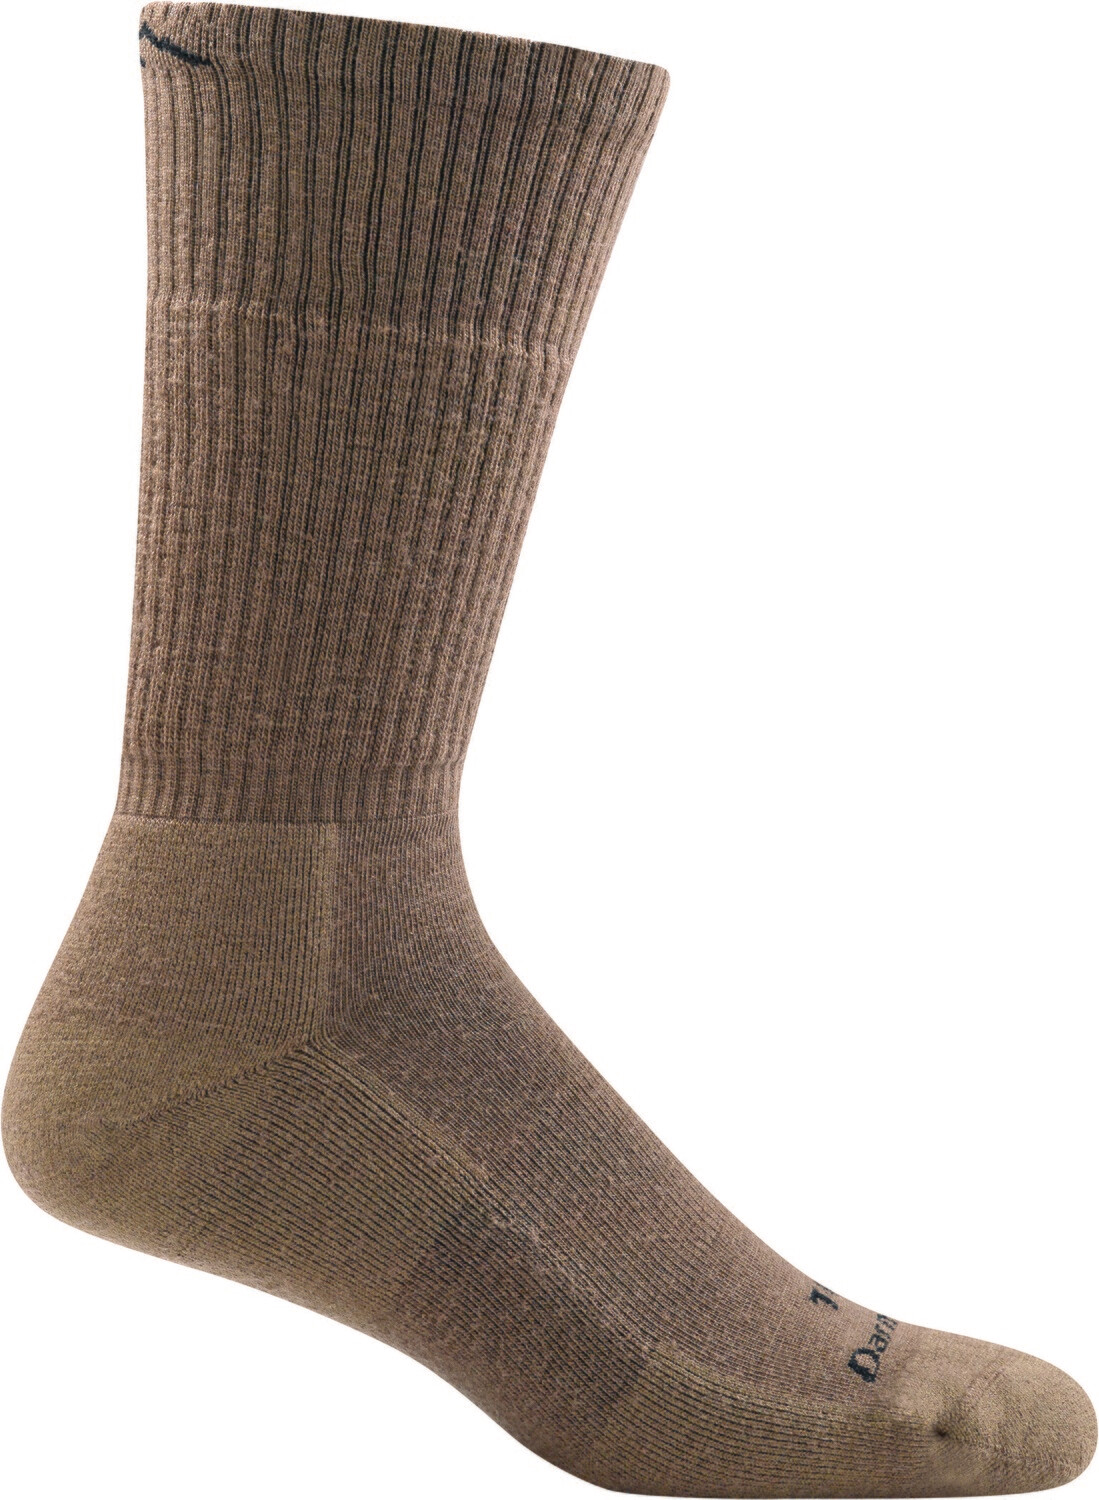 Men's/Unisex T4021 Boot Midweight Cushion Tactical Sock